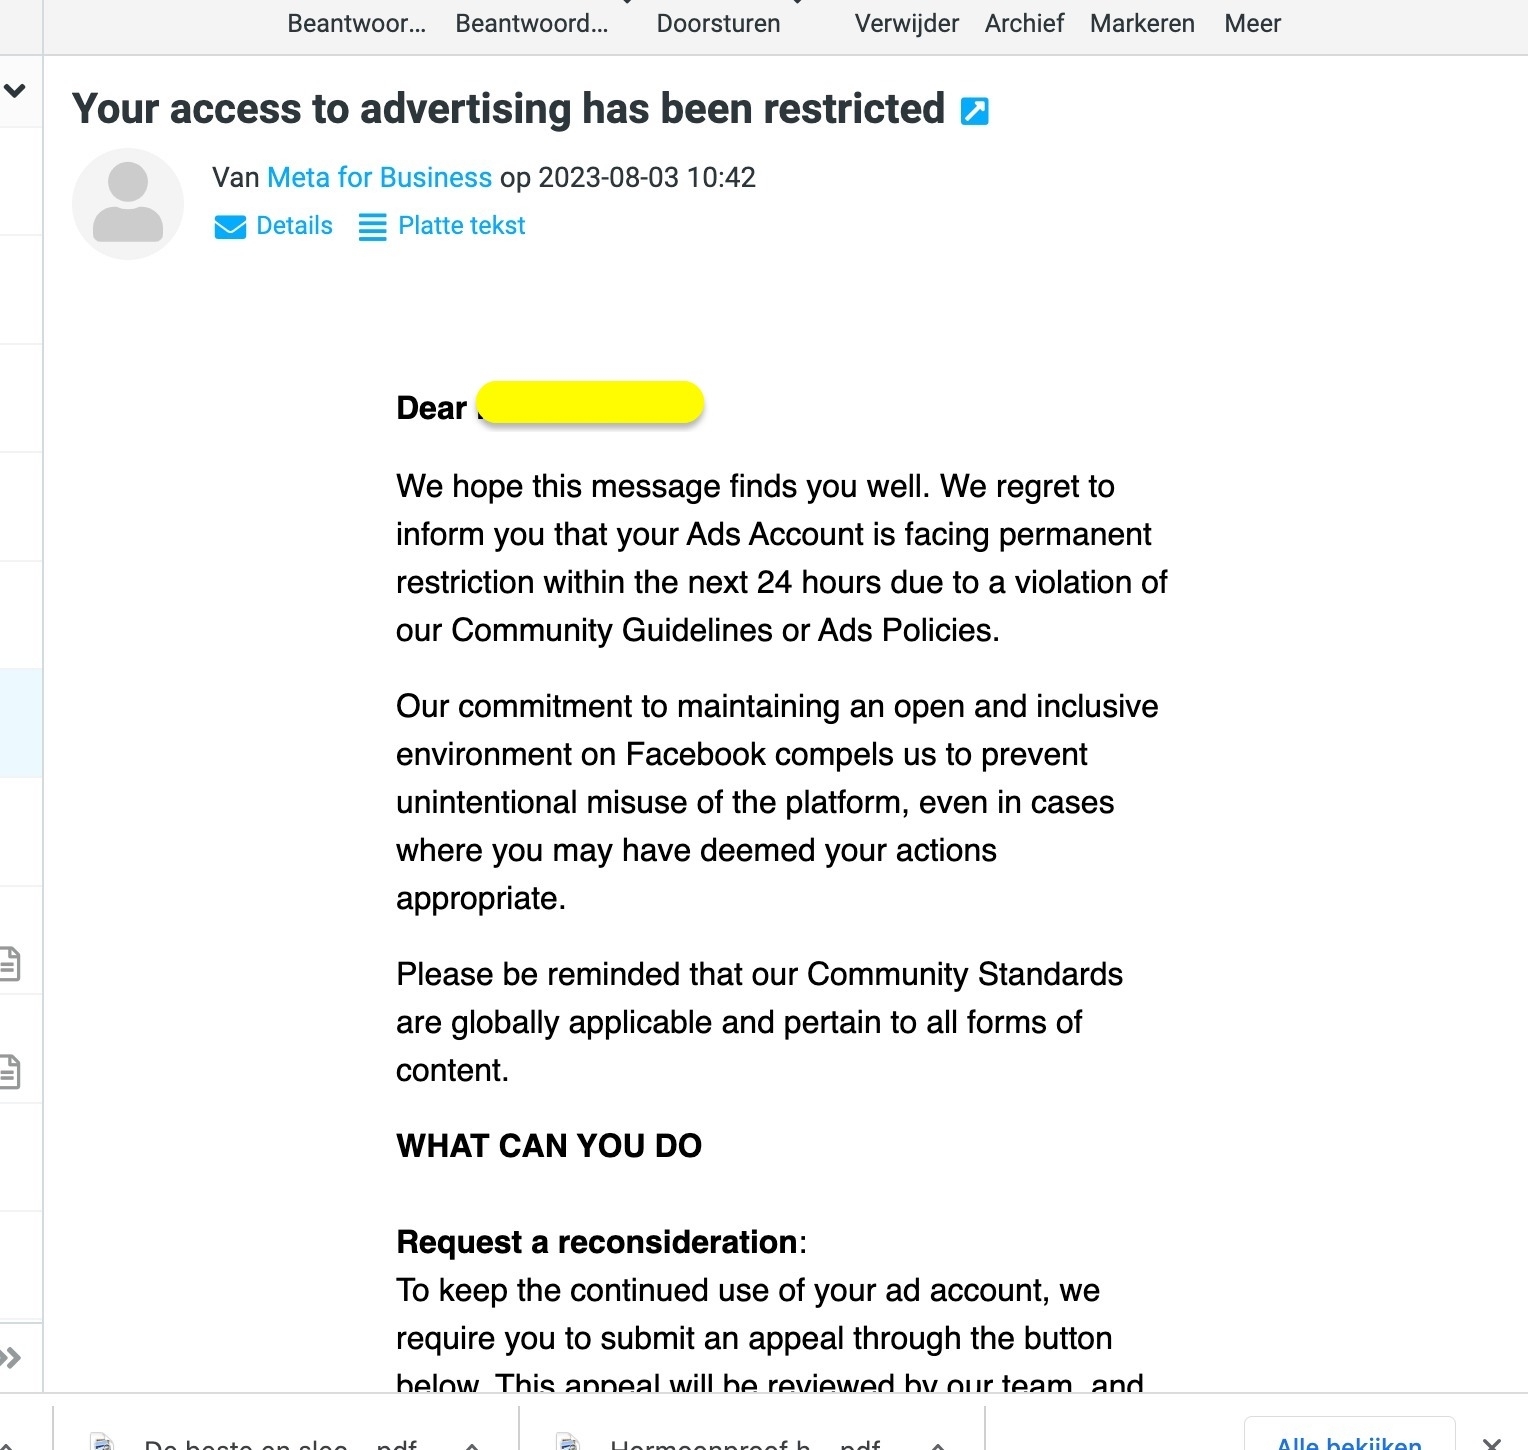 Mail van Meta support The content in your ad violated Facebook’s advertising policies